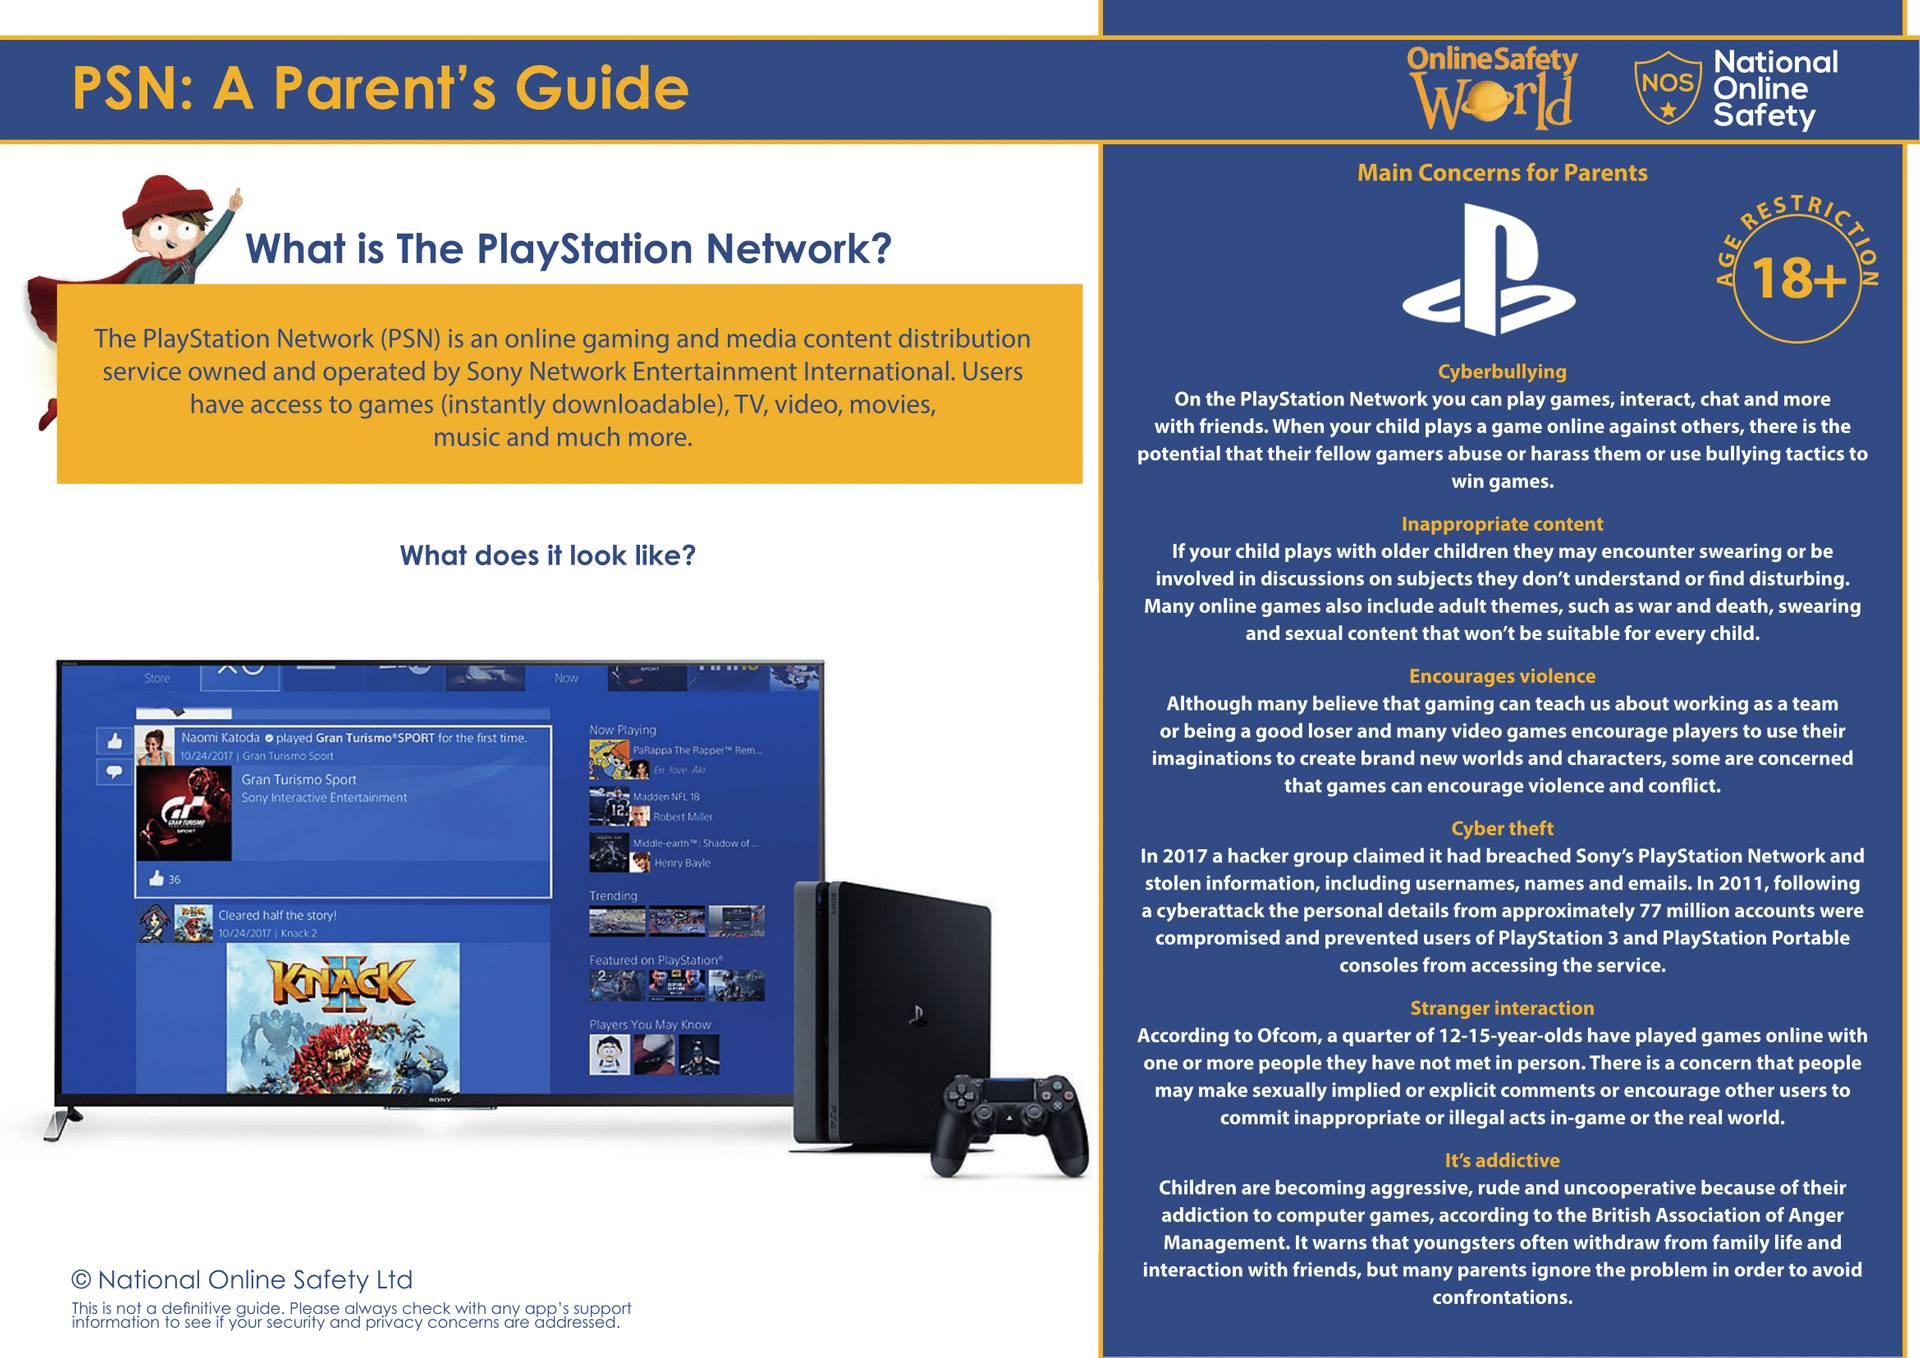 How to Create a US PSN Account on PS4 - Guide